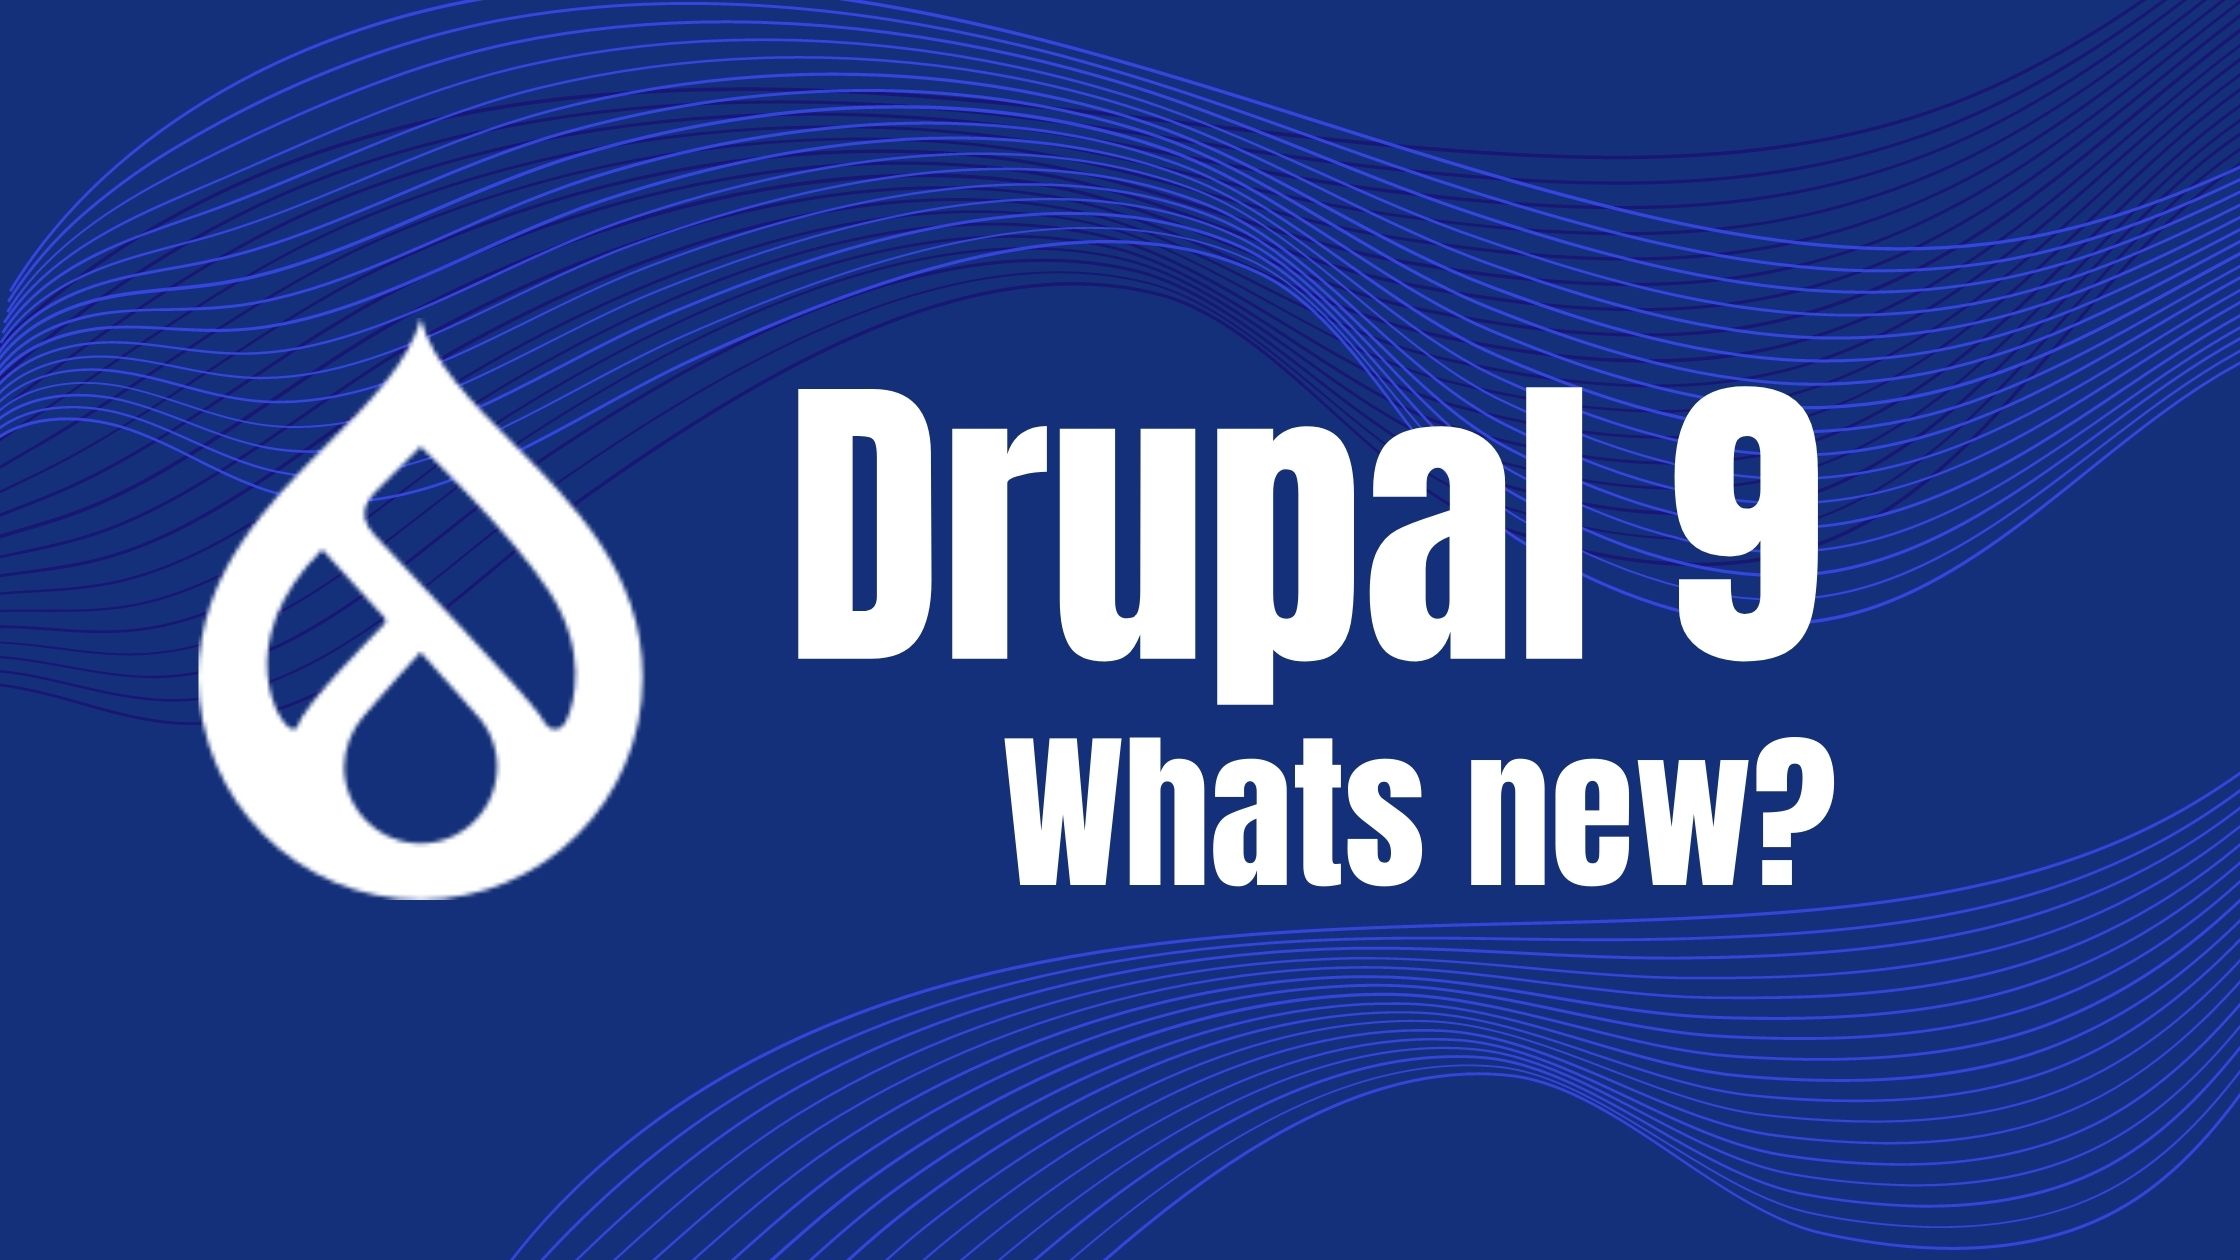 Drupal CMS | What Is The Latest Drupal Version And Its Advantages?